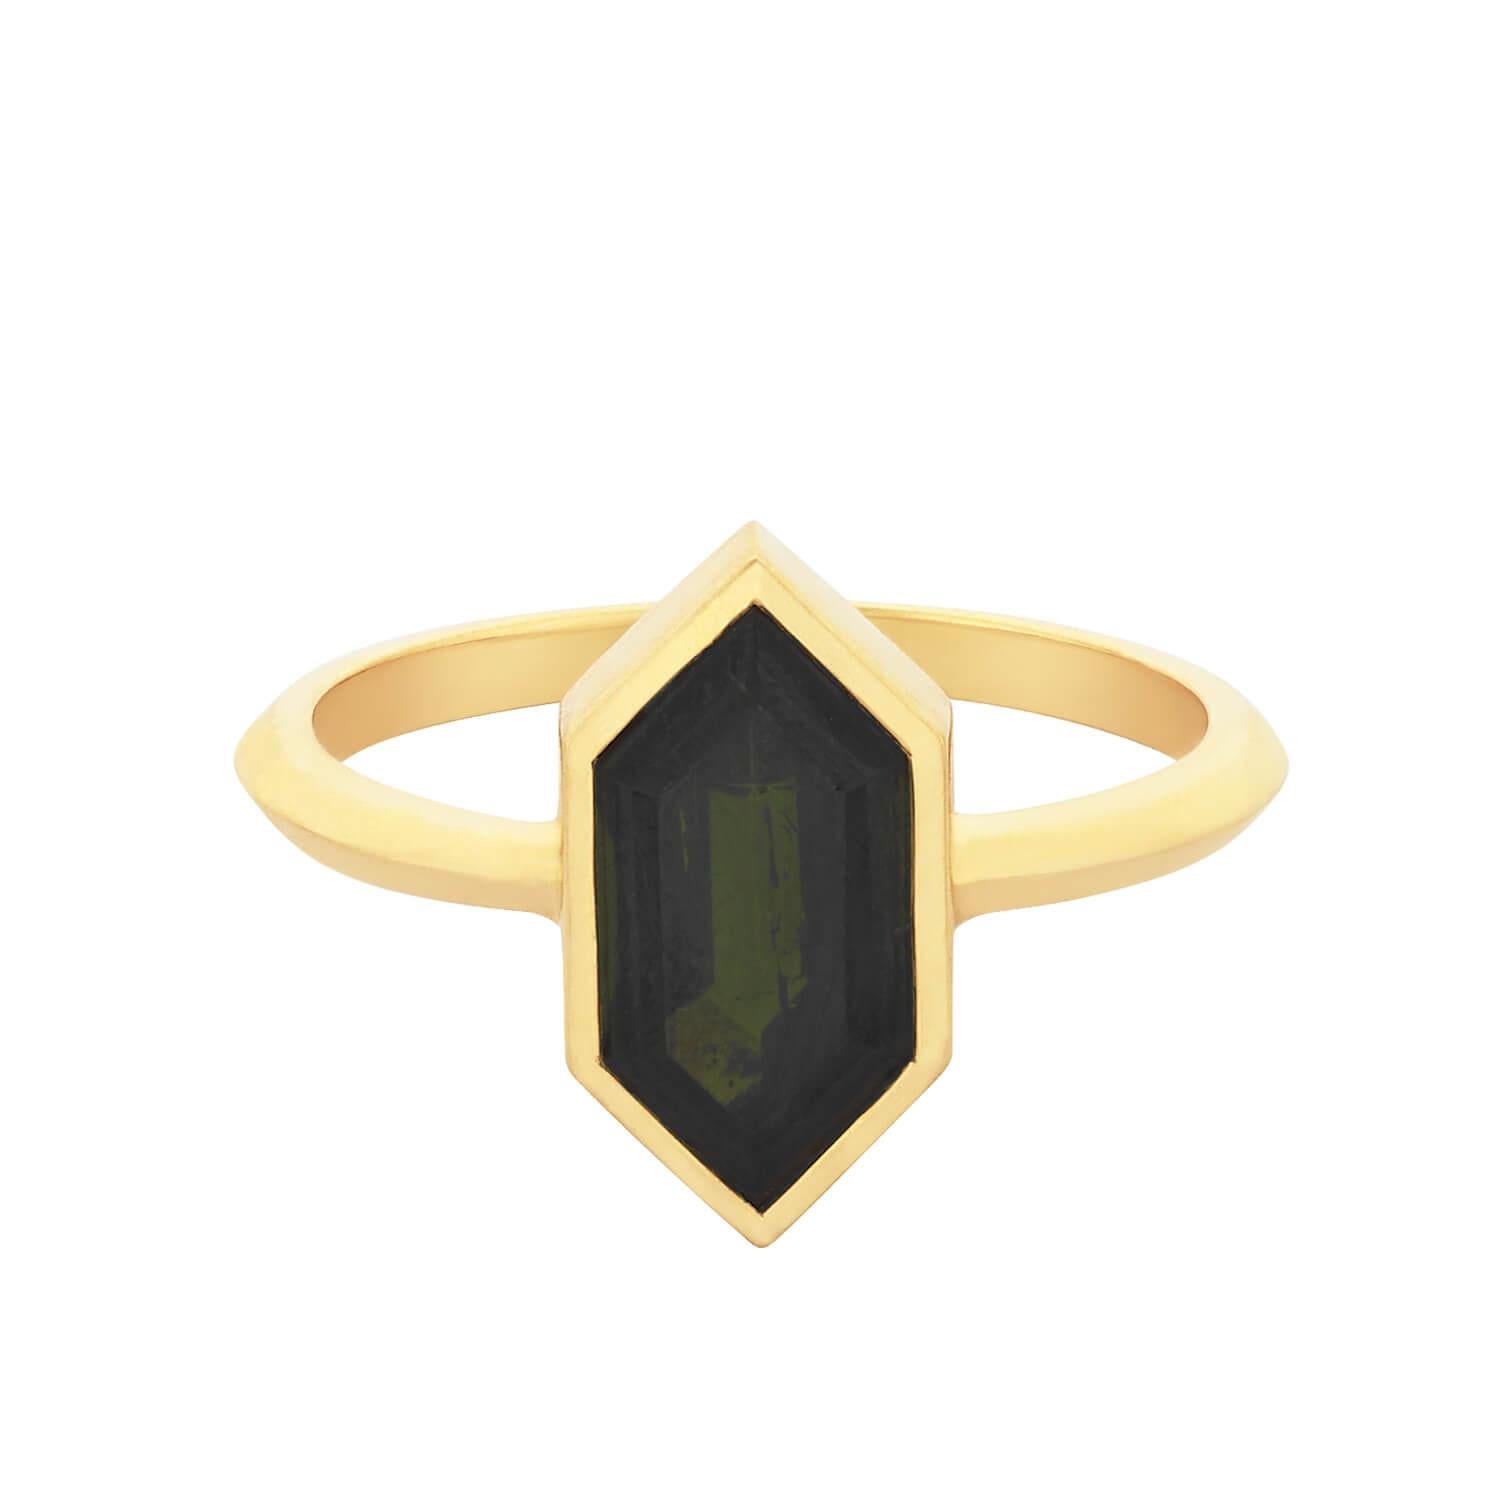 Ring size: 55

The Misti ring features a Green Tourmaline crystal cut set in an 18k gold frame. The pointed edge of the stone perfectly transitions into the sword edge band.

These bespoke hand cut stones make each ring truly unique, with their own